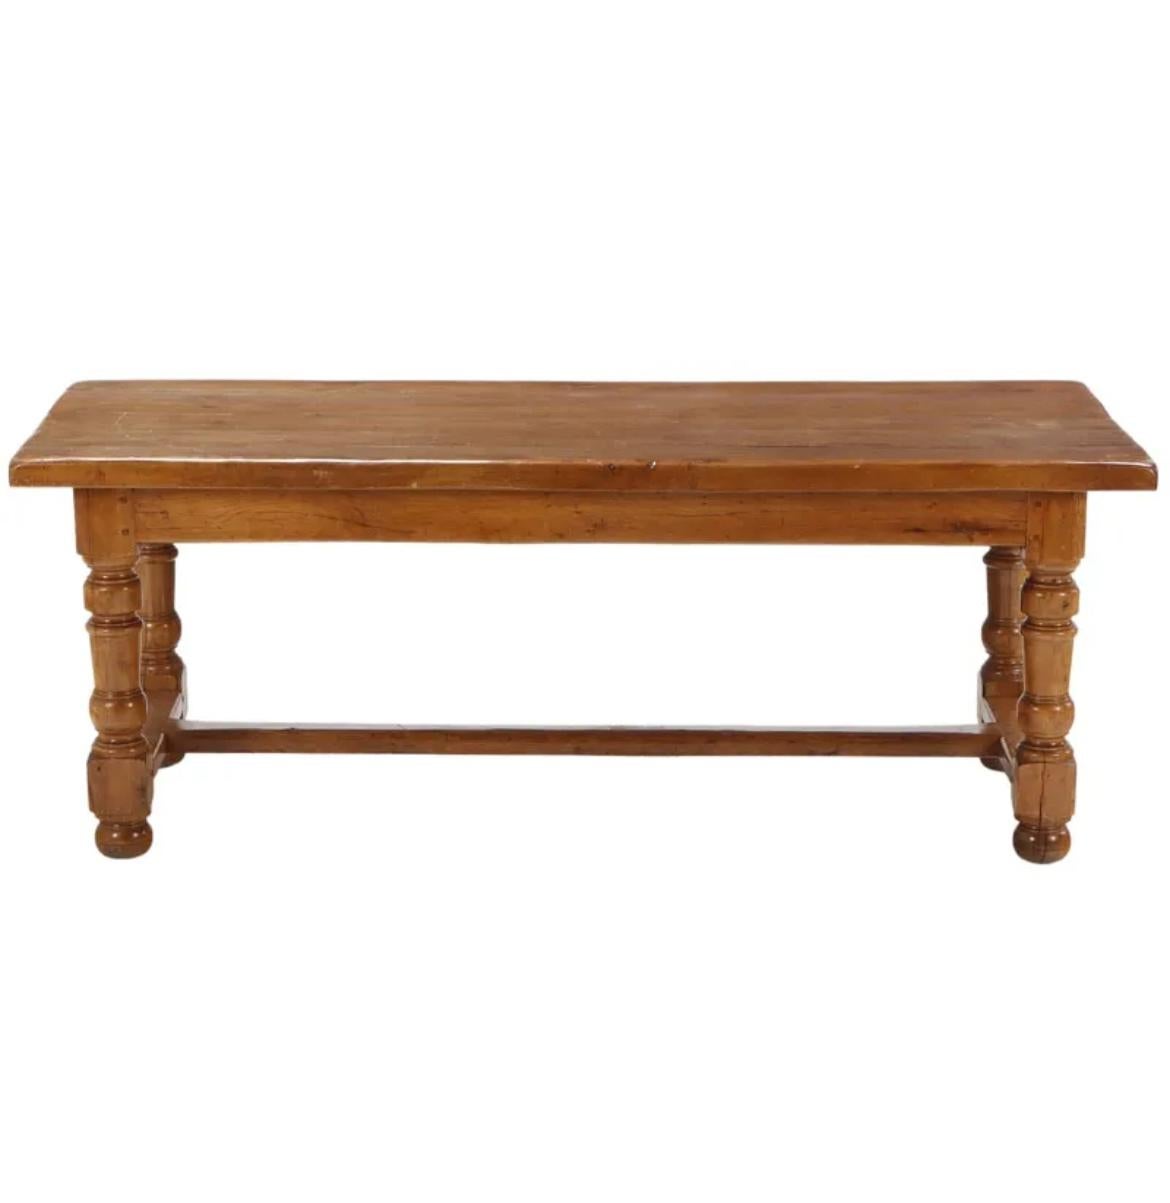 A truly fantastic late 19th century French oak table. This is one of the best examples we have ever found in the farmhouse style. Just an overwhelming amount of character. Can be used as a dining table or desk.  

Excellent joinery and